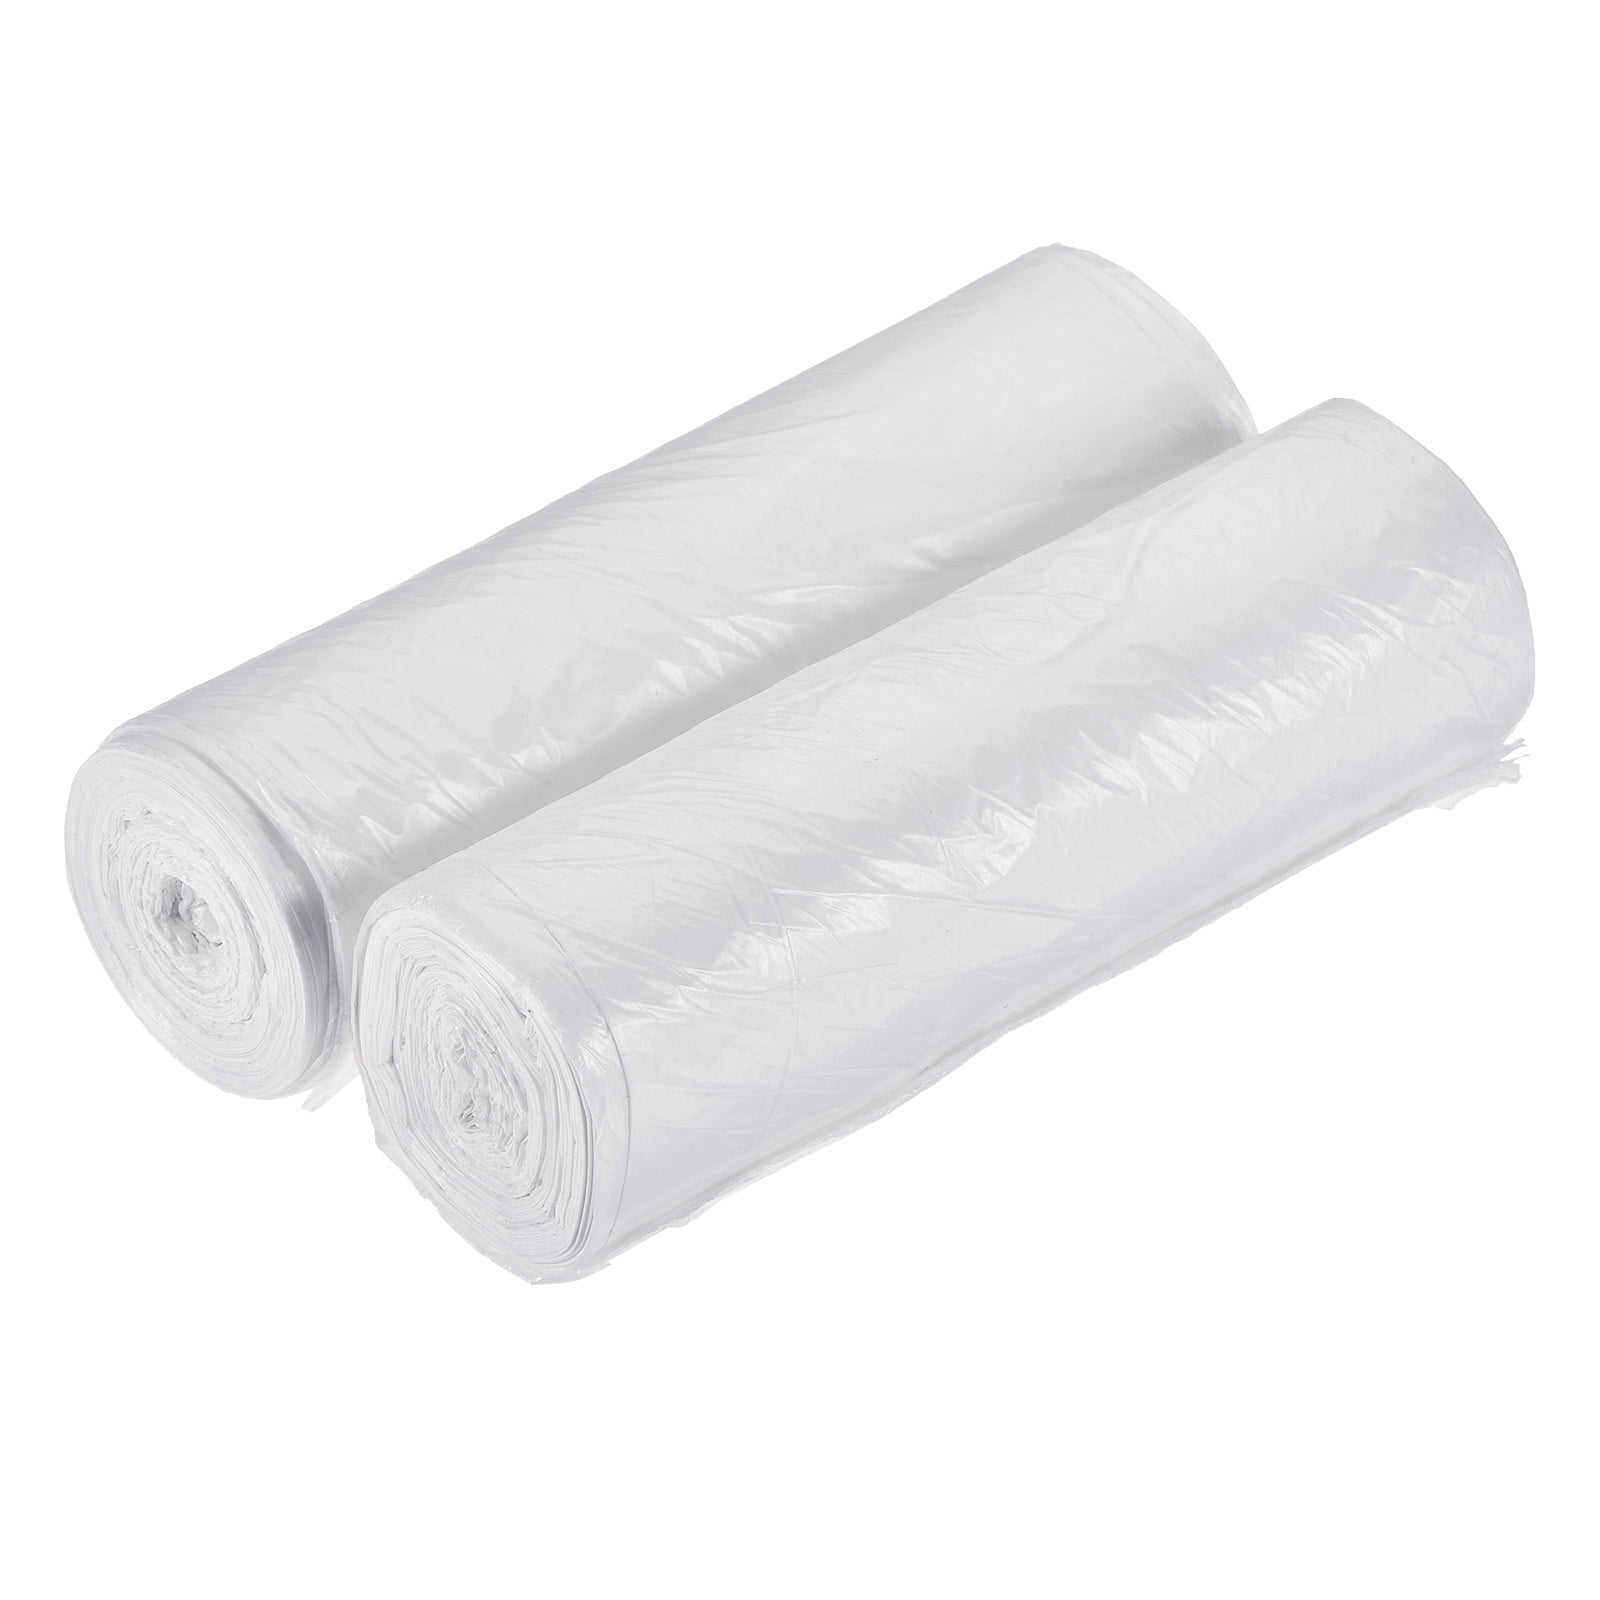 Charmount Small Trash Bags - Bathroom Trash Bags 2.6 Gallon Trash Can  Liners, Unscented,180 Counts